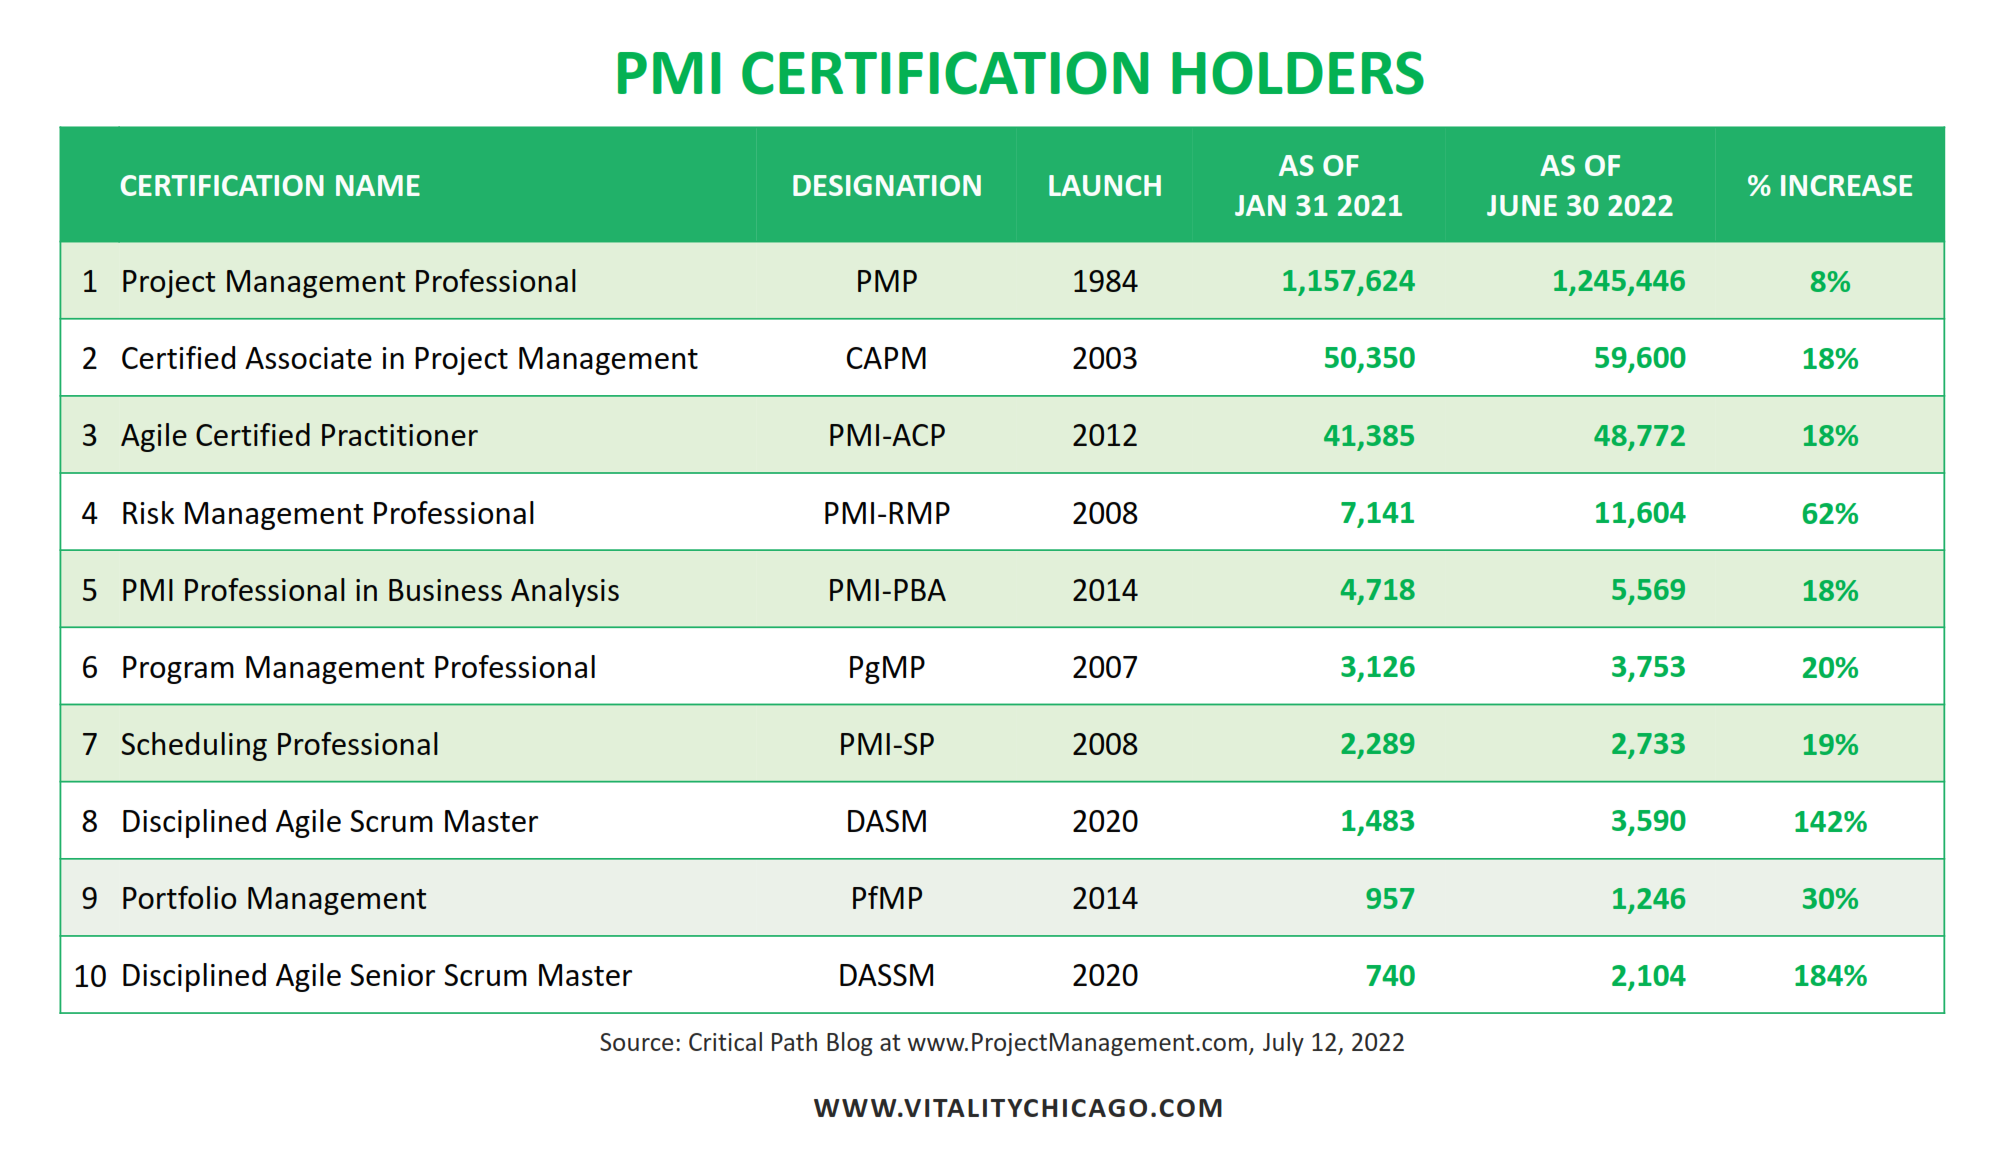 PMI stats and certification chart as of June 2022